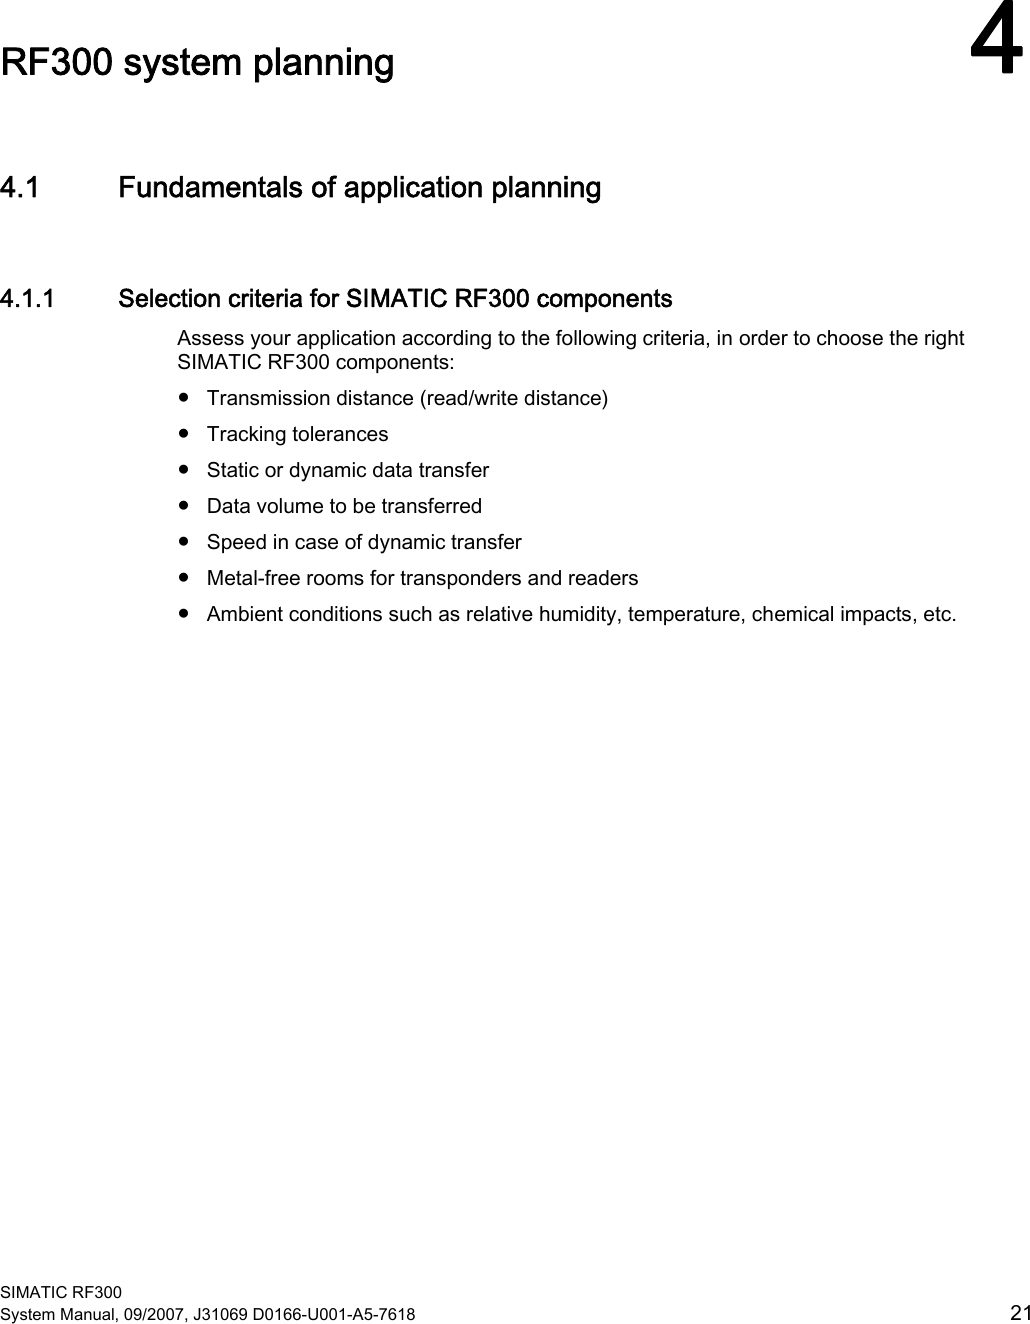  SIMATIC RF300 System Manual, 09/2007, J31069 D0166-U001-A5-7618  21 RF300 system planning  44.1 Fundamentals of application planning 4.1.1 Selection criteria for SIMATIC RF300 components Assess your application according to the following criteria, in order to choose the right SIMATIC RF300 components:  ●  Transmission distance (read/write distance) ●  Tracking tolerances ●  Static or dynamic data transfer ●  Data volume to be transferred ●  Speed in case of dynamic transfer ●  Metal-free rooms for transponders and readers ●  Ambient conditions such as relative humidity, temperature, chemical impacts, etc. 